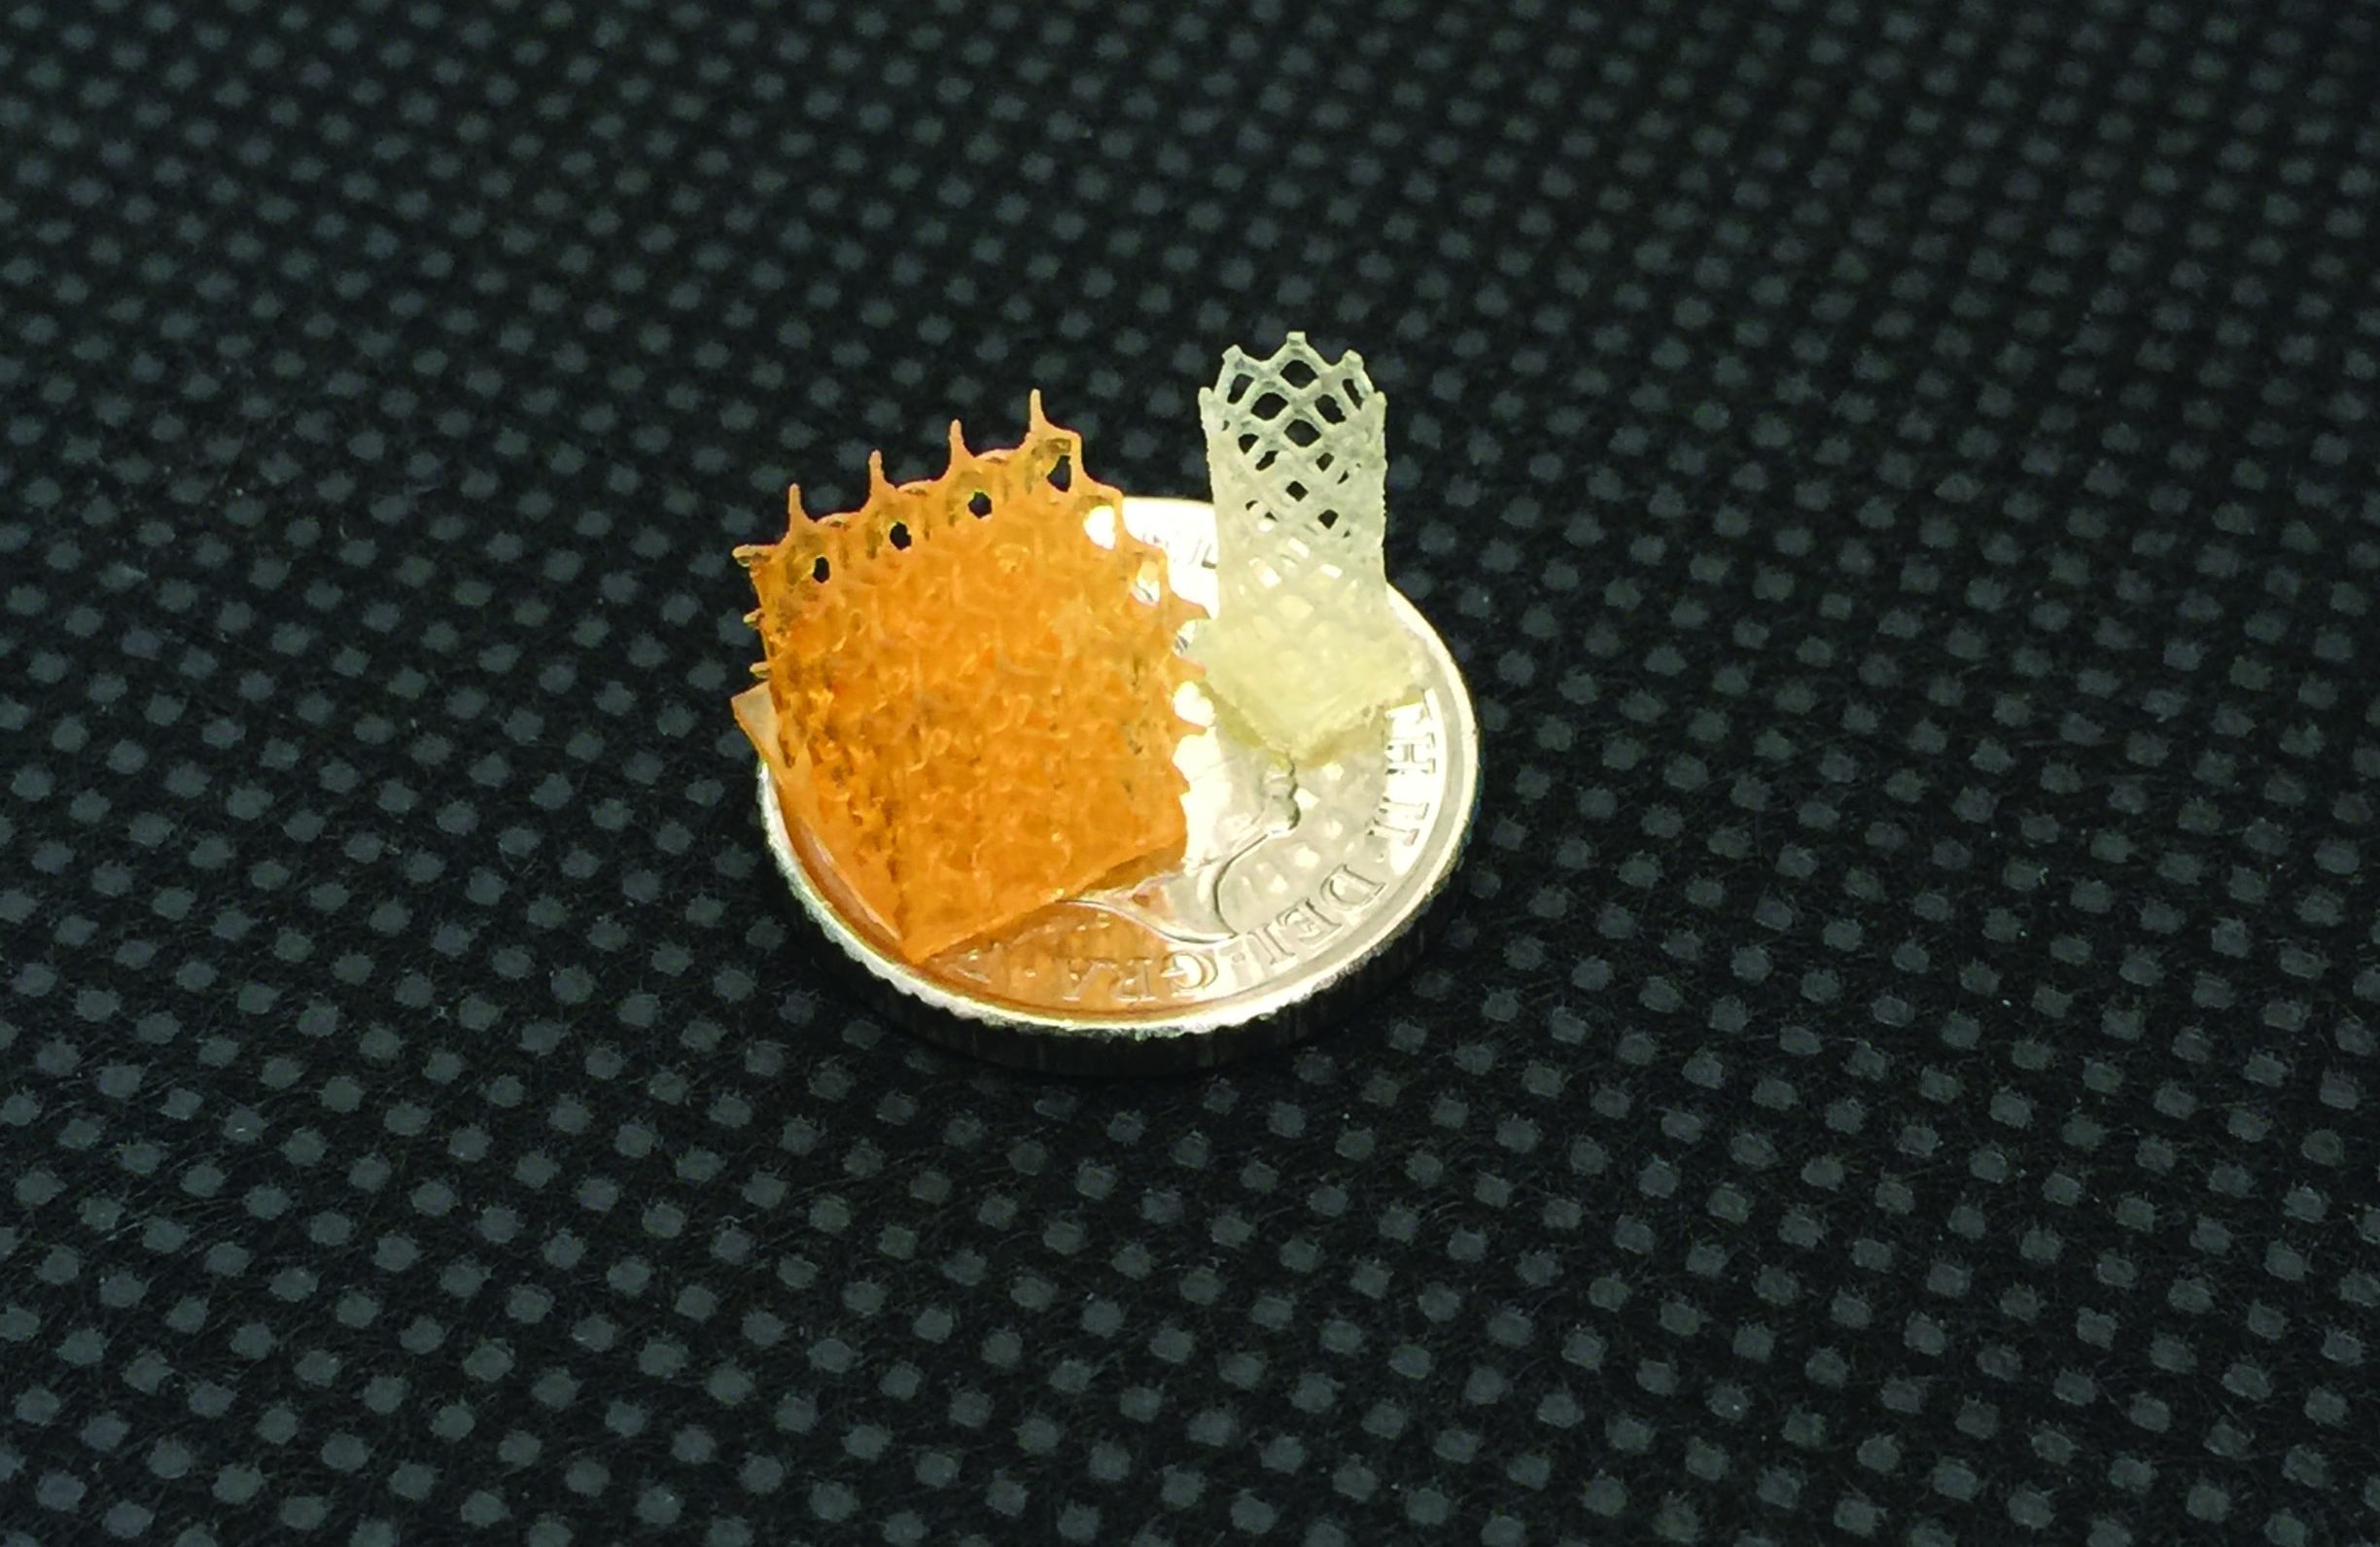 4d printing technology stents